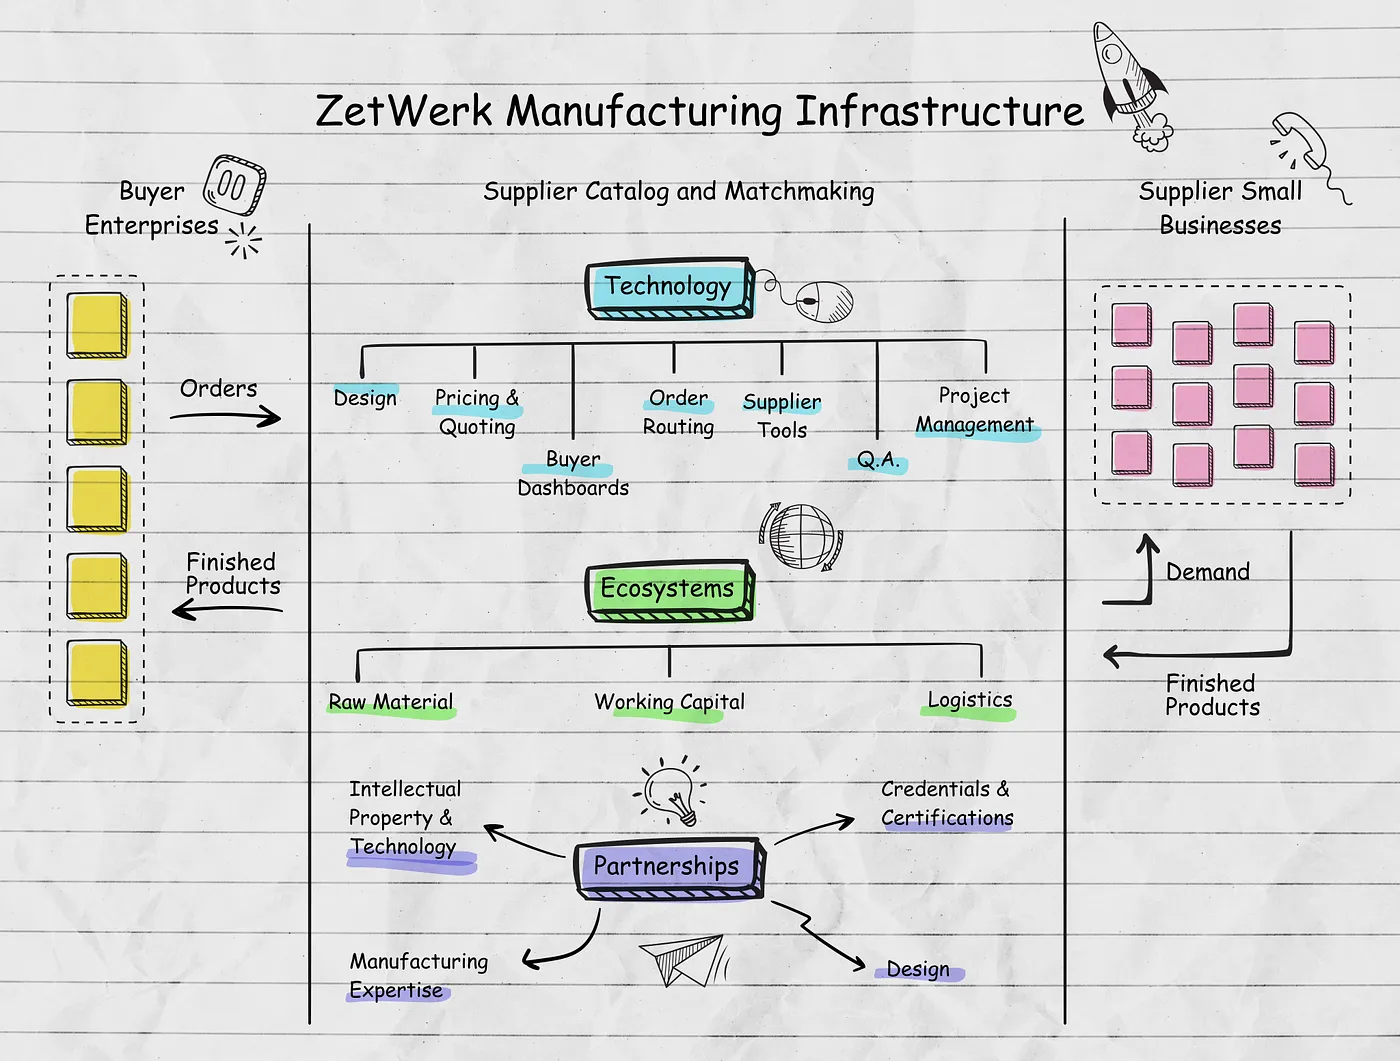 Lightspeed and Zetwerk: What it takes to build a global manufacturing company